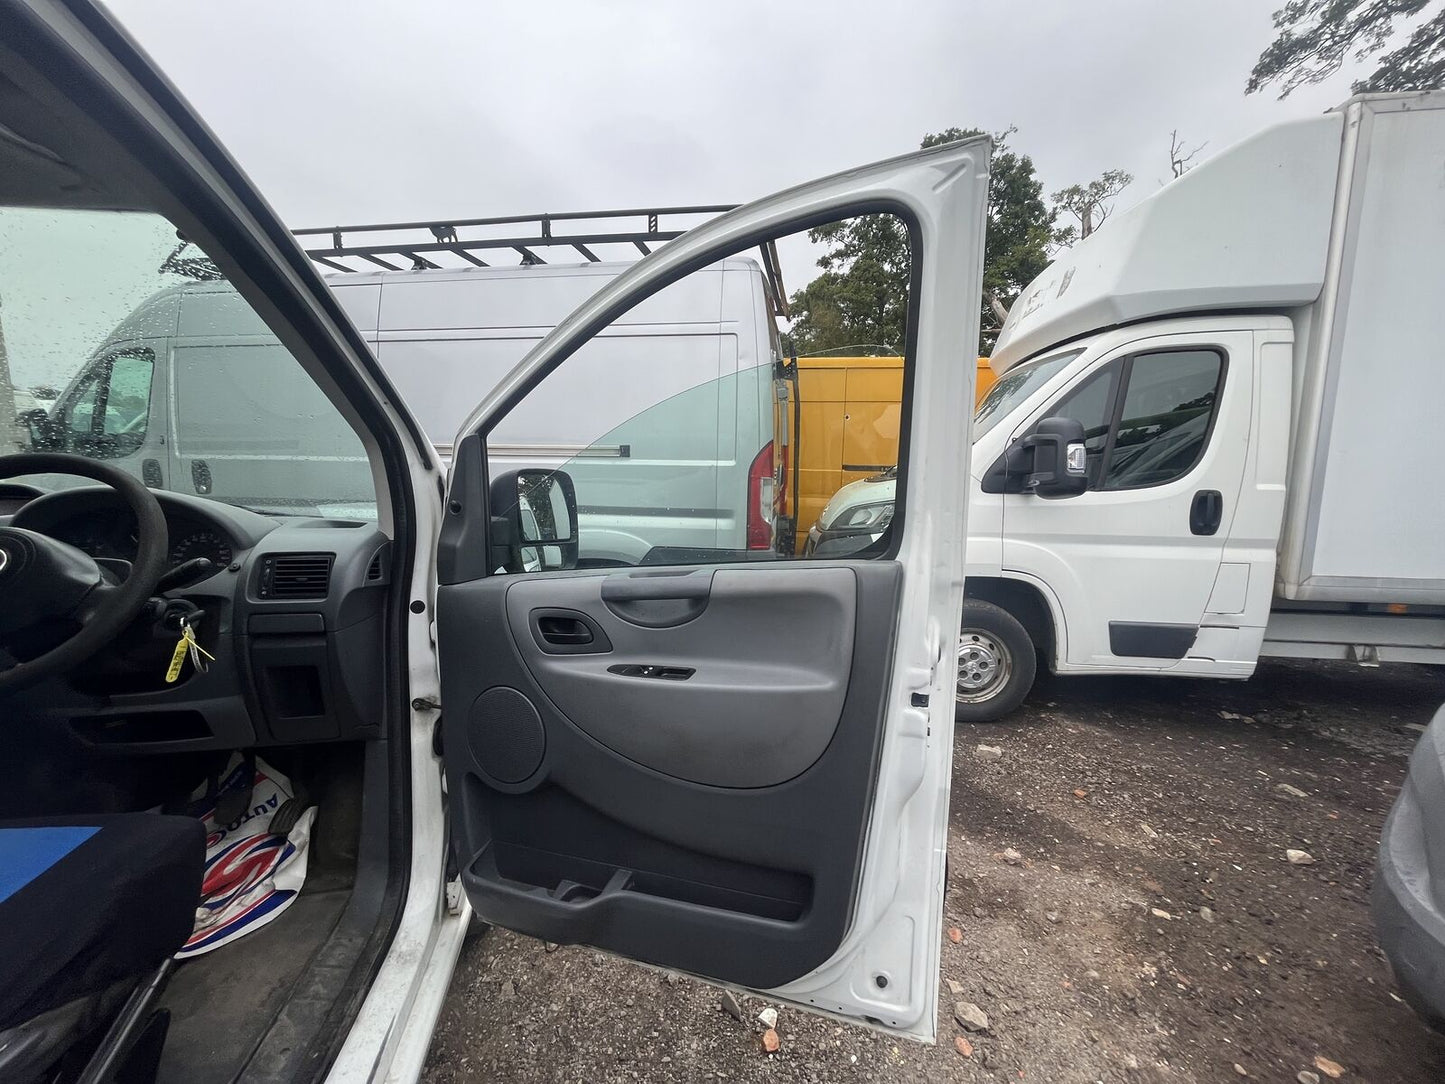 Bid on PART SERVICE HISTORY: 61 PLATE FIAT SCUDO PANEL VAN - (NO VAT ON HAMMER)- Buy &amp; Sell on Auction with EAMA Group